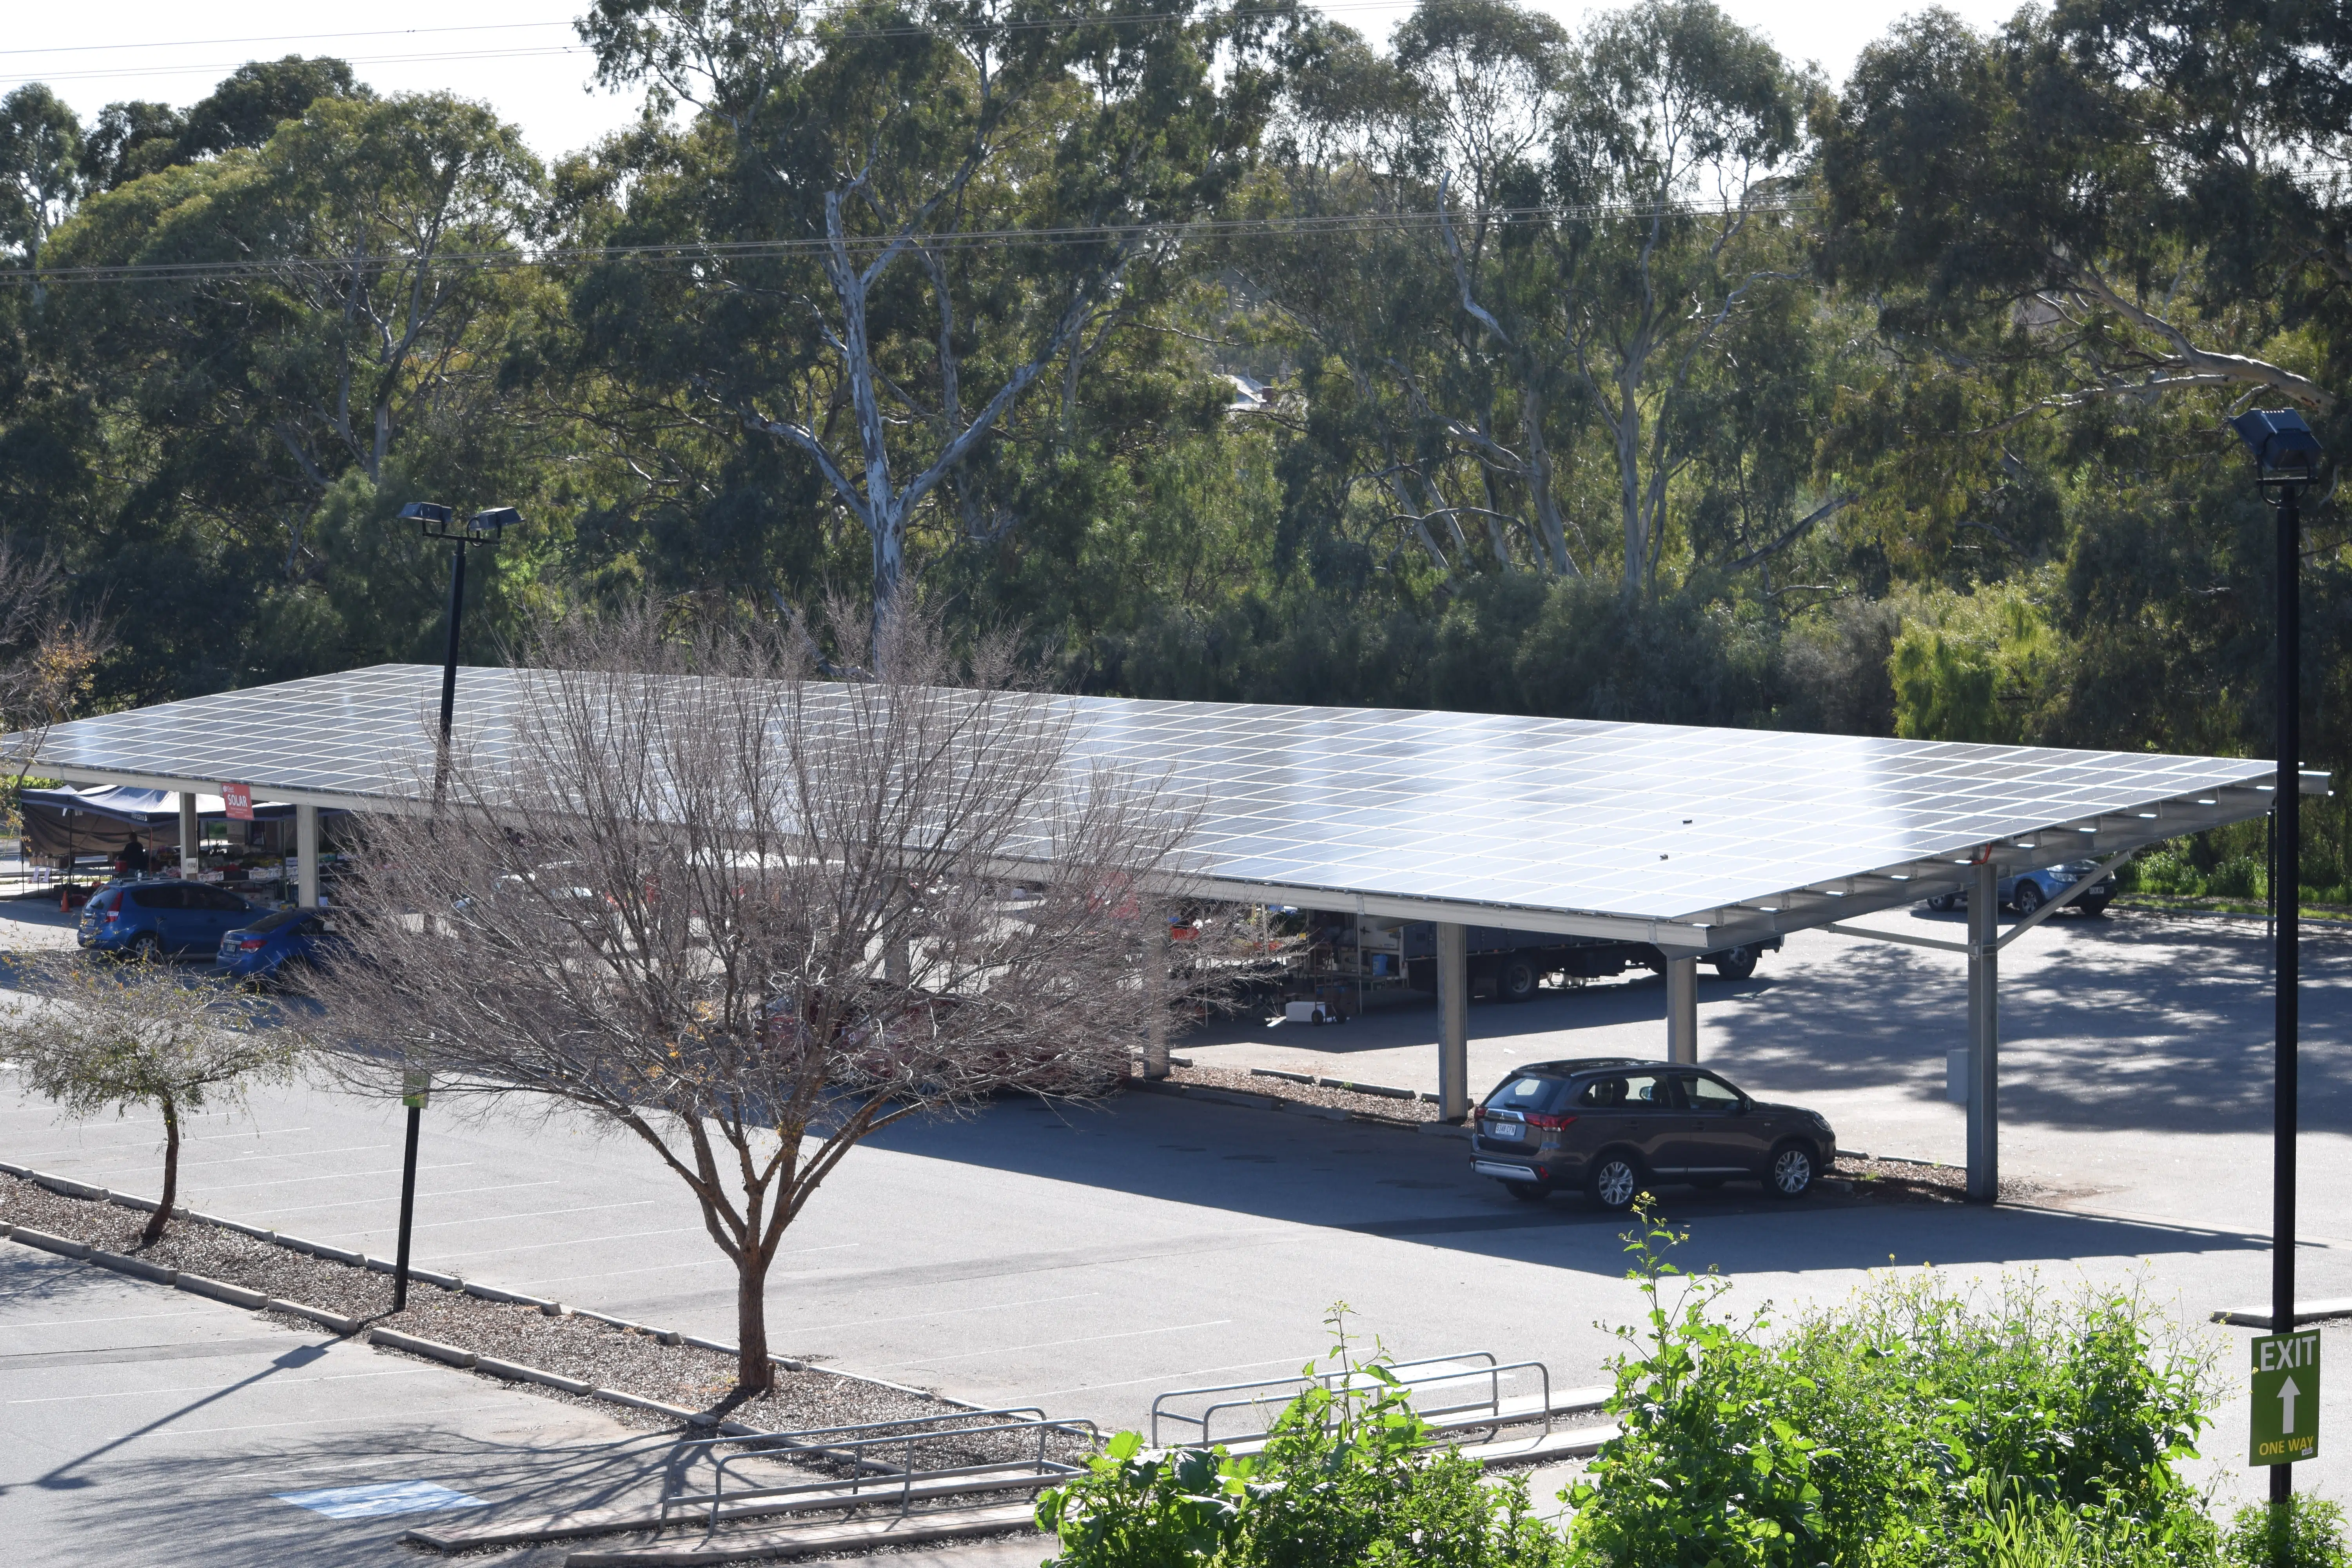 Old Spot Solar Car Park Shade Structure